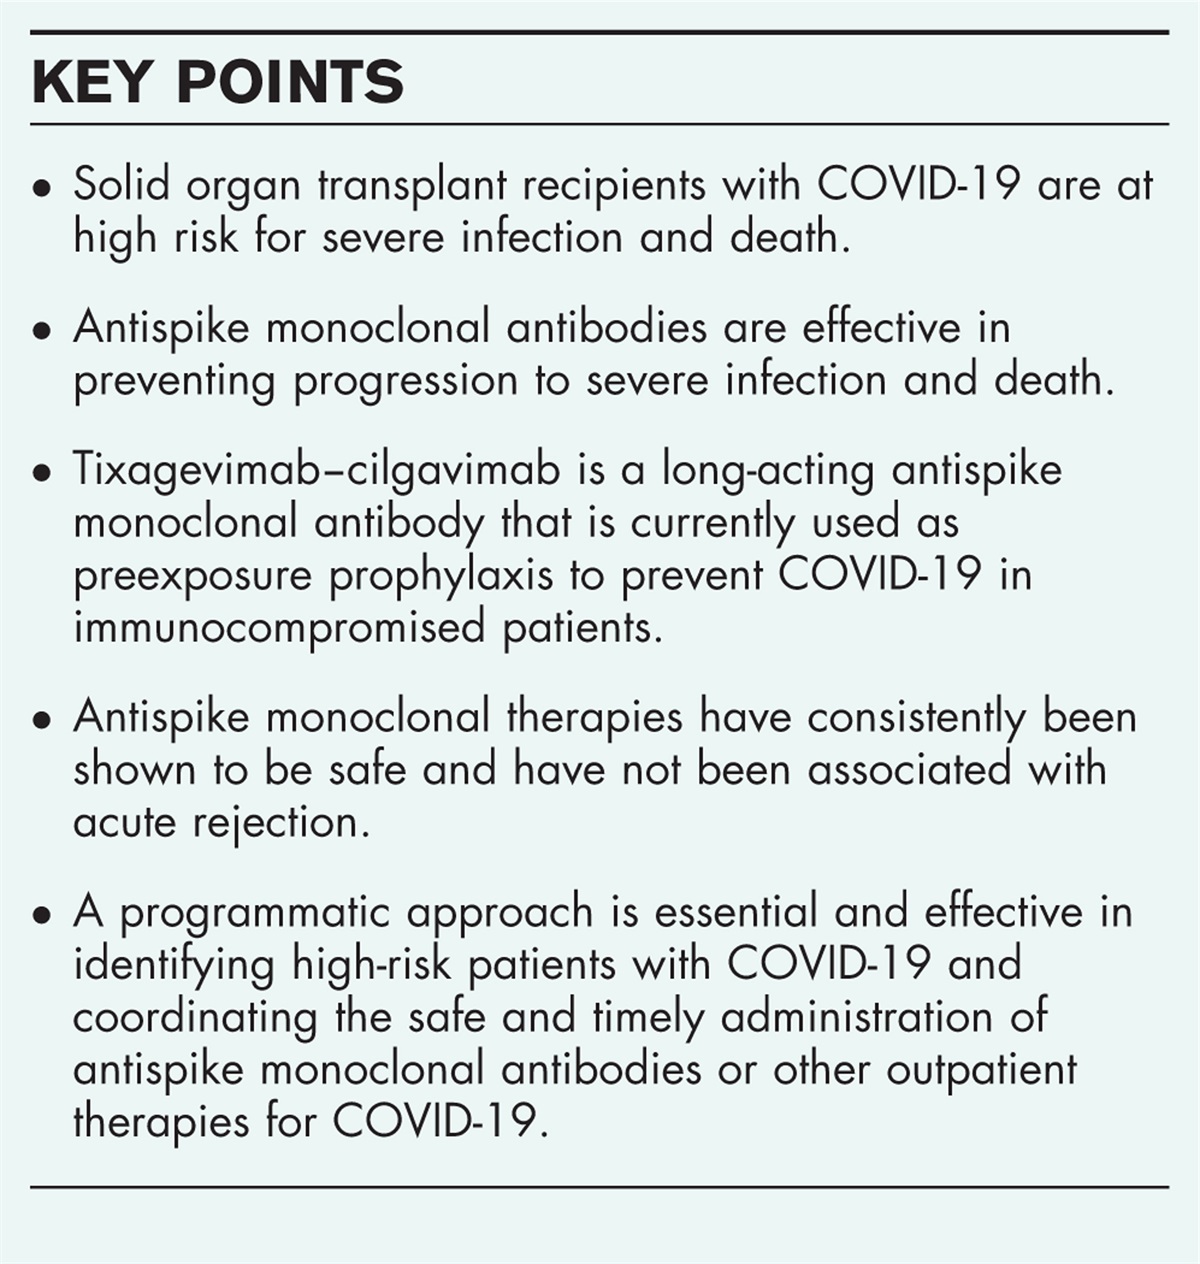 Antispike monoclonal antibodies for prevention and treatment of coronavirus disease-2019 in solid organ transplant recipients